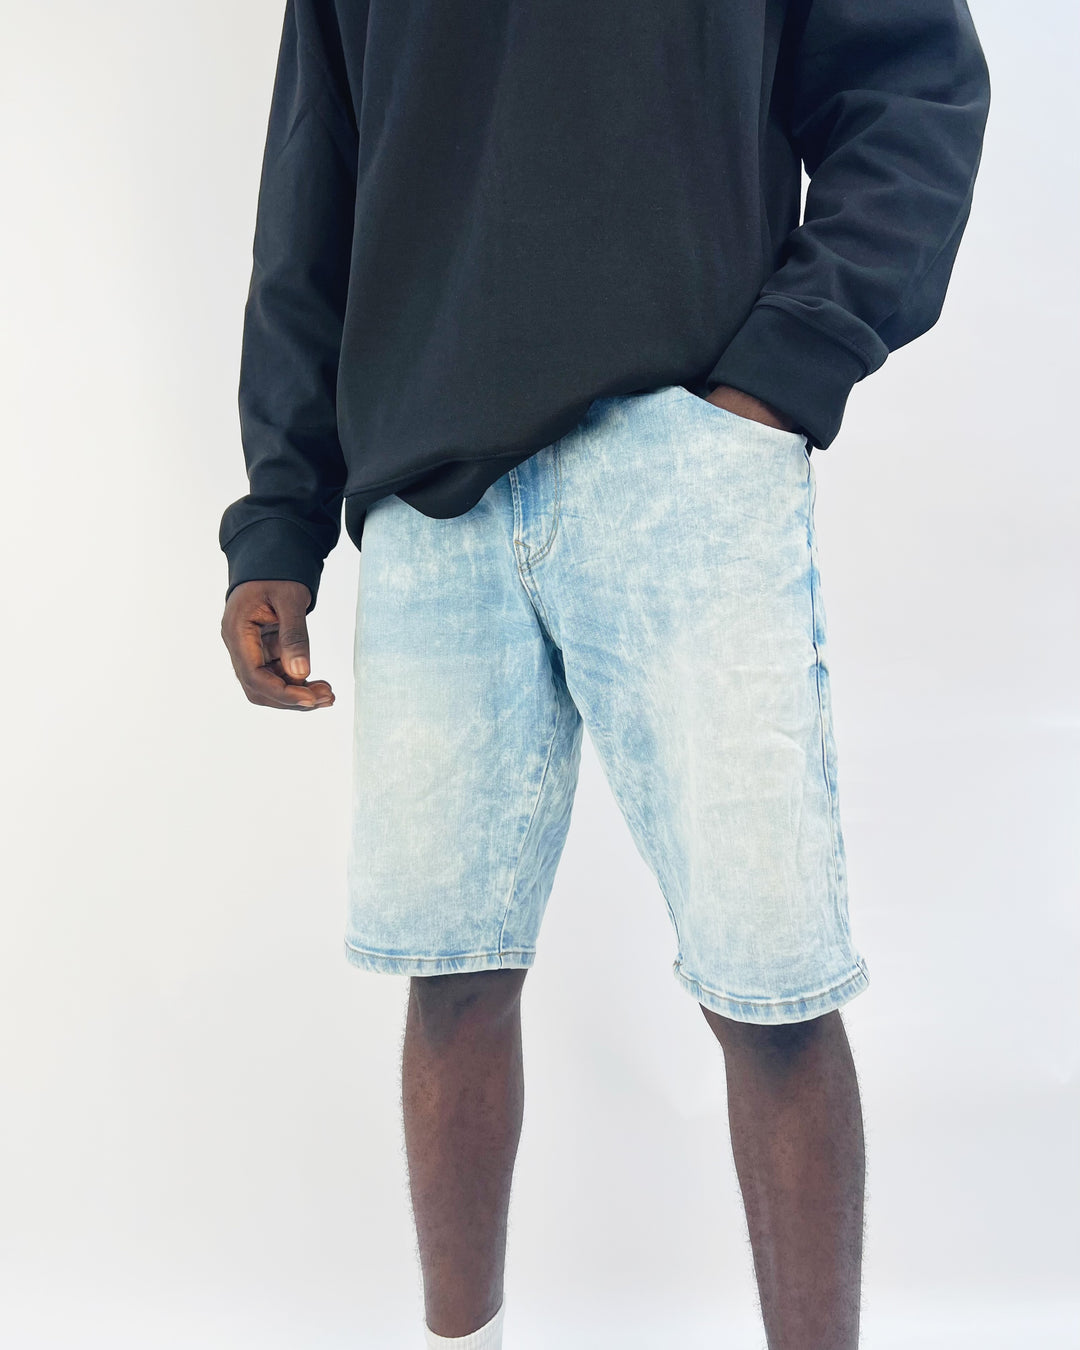 Tom Tailor Marble Washed Denim shorts in blue